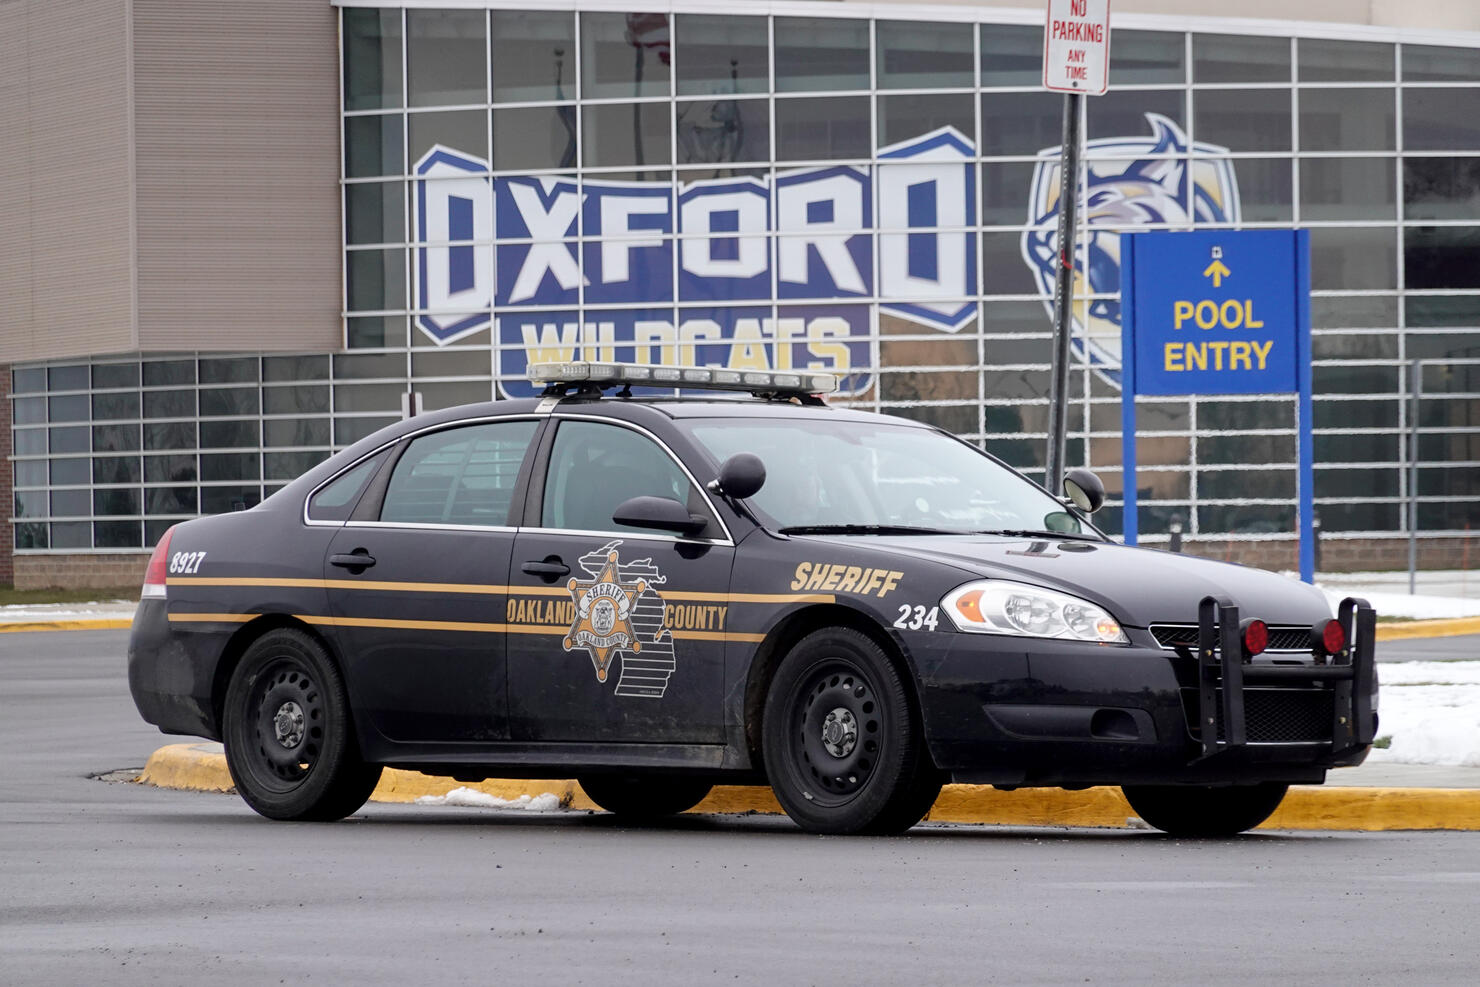 Shooting At Oxford High School In Michigan Leaves 3 Students Dead, 8 Injured